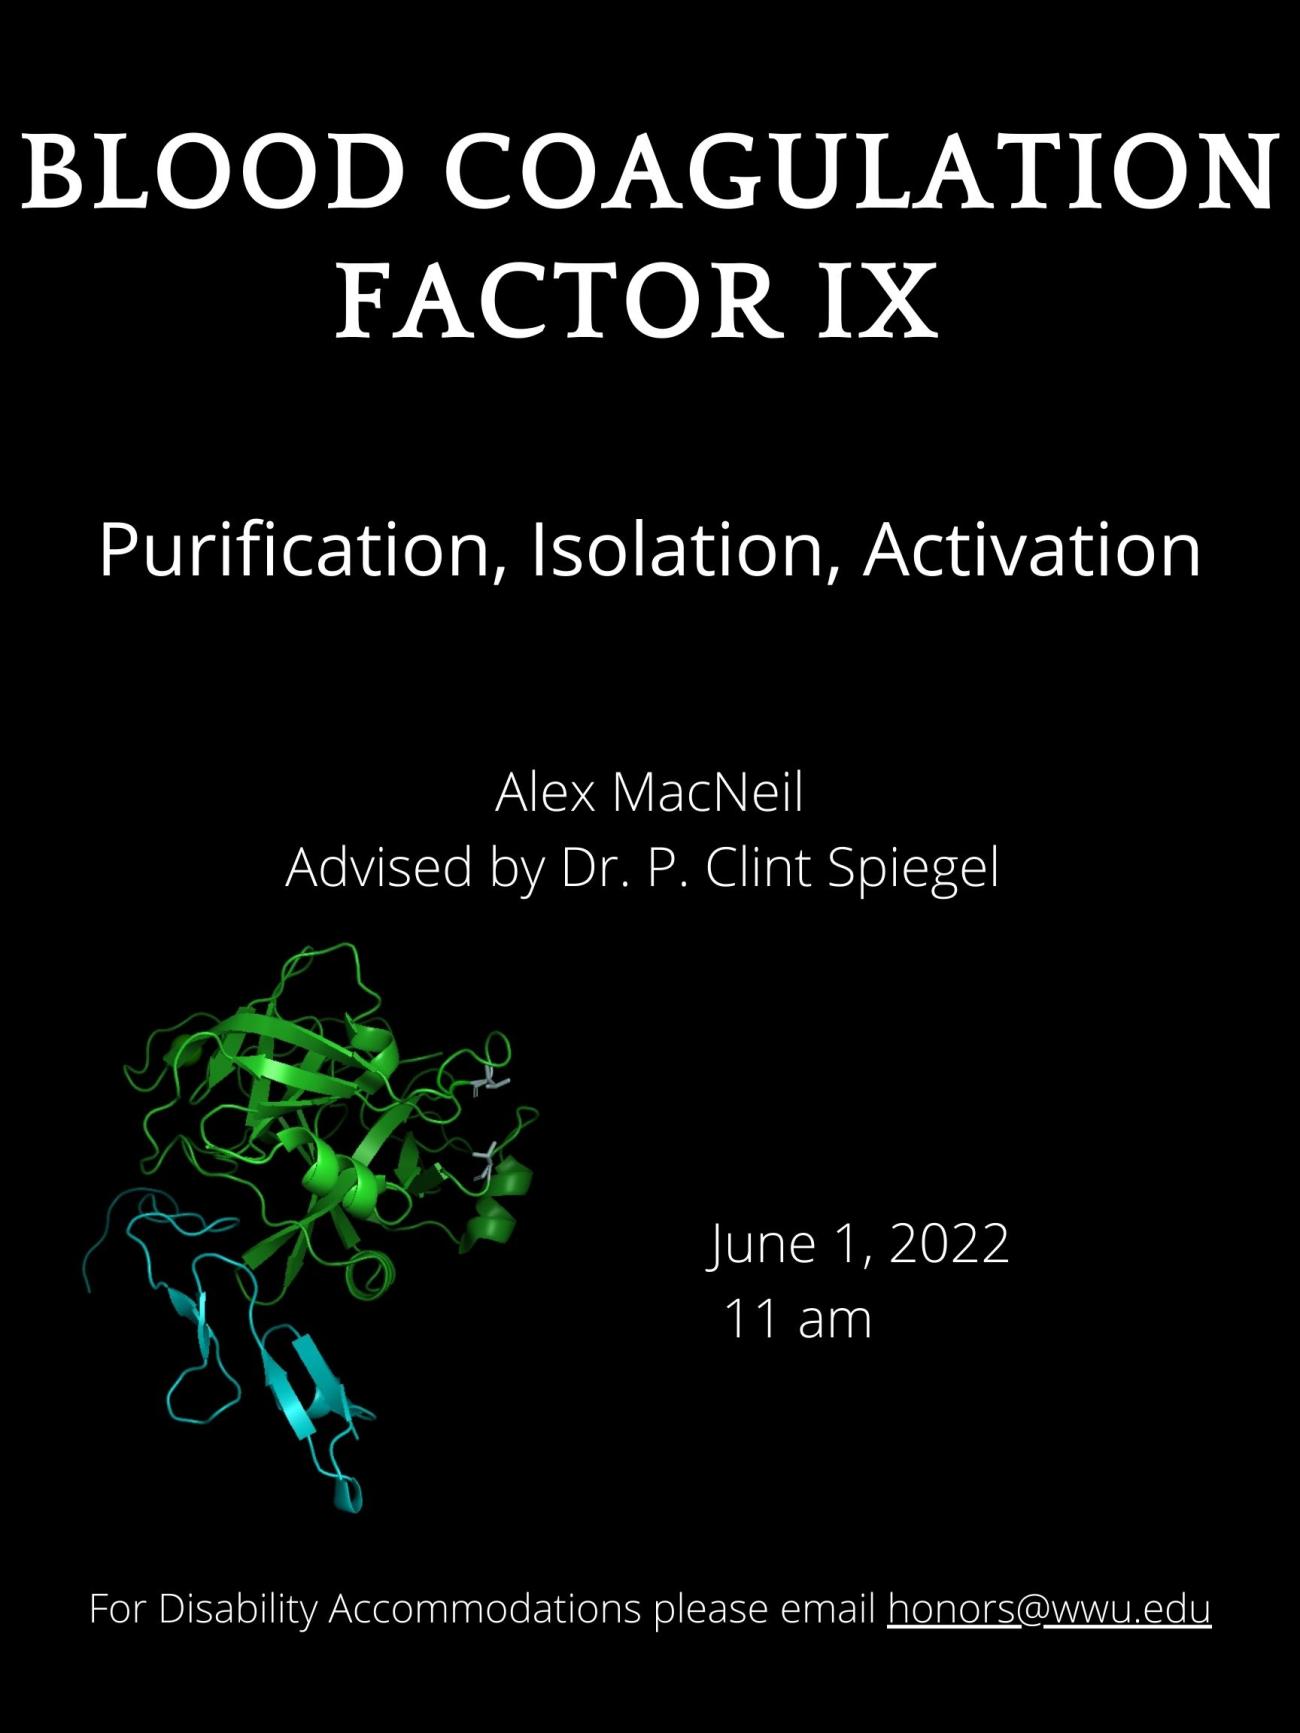 Black background containing a screen-printed illustration of a cartoon protein. Text reads " Coagulation Factor IX : Purification, Isolation, Activation. Presented by Alex MacNeil, advised by Dr. P. Clint Spiegel, June 1st 2022. For disability accommodations please email honors@wwu.edu." 